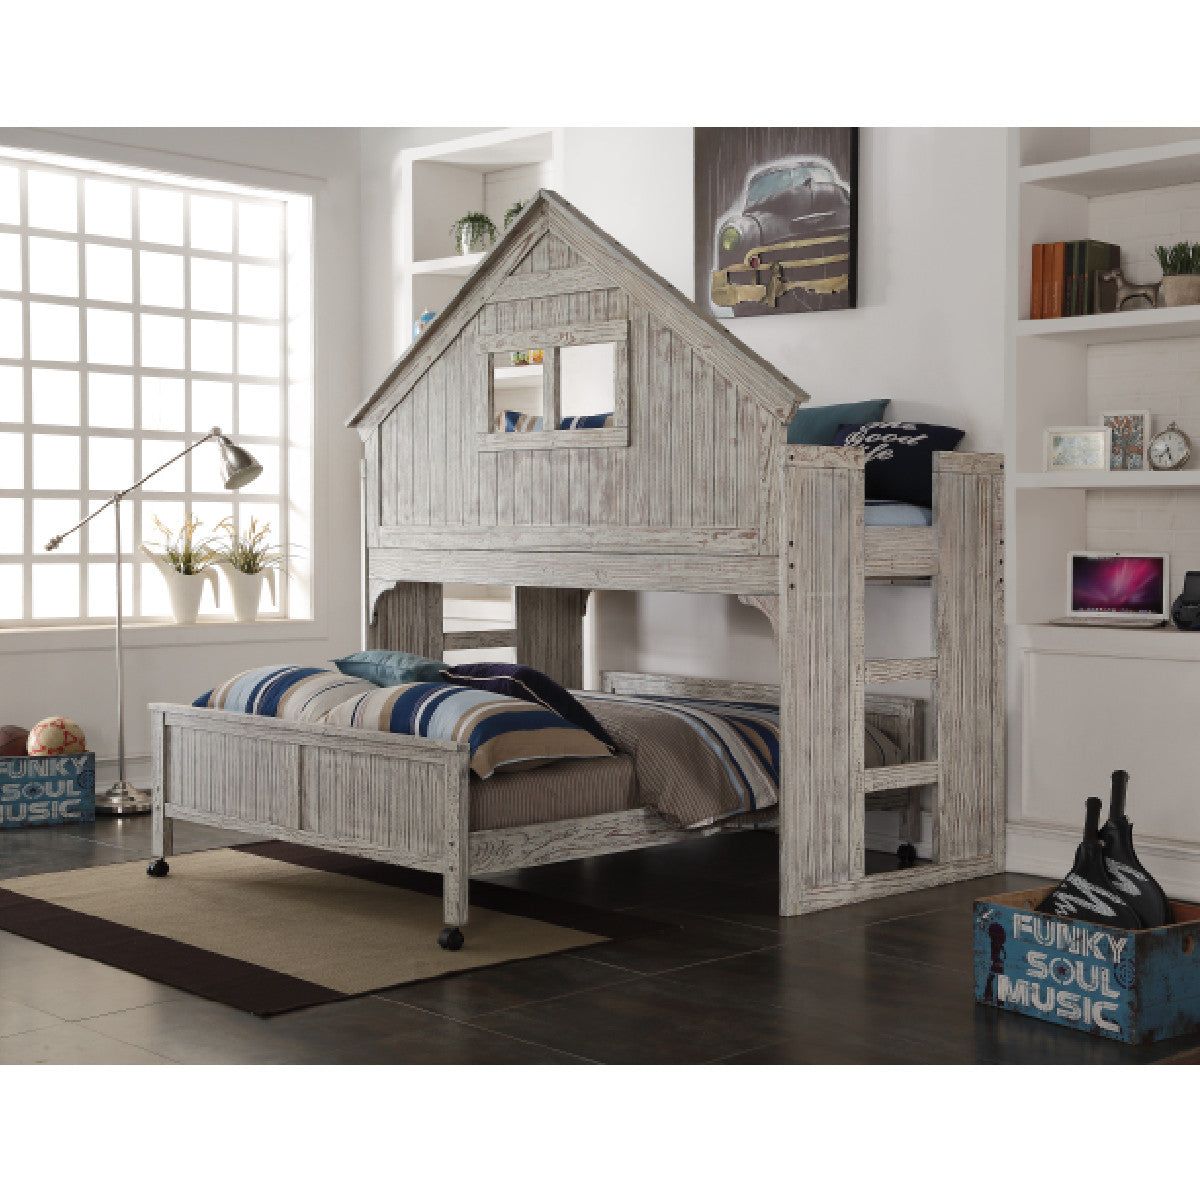 CLUB HOUSE LOW LOFT TWIN BED WITH FULL CASTER BED IN BRUSHED DRIFTWOOD FINISH